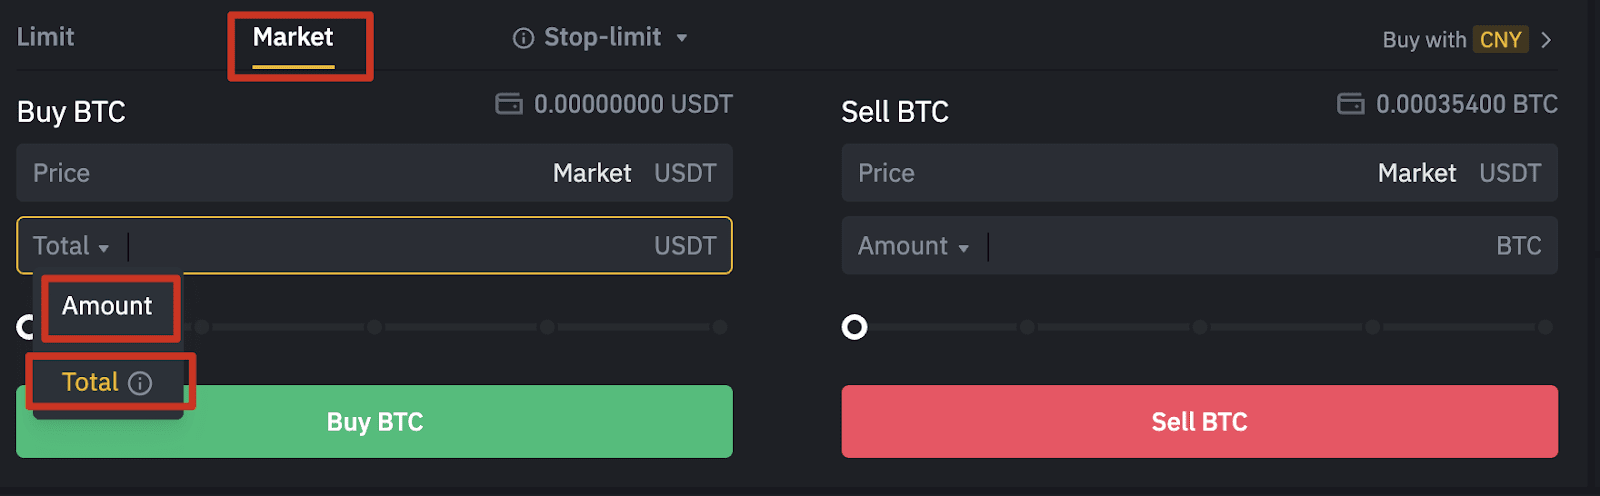 Market order in crypto trading